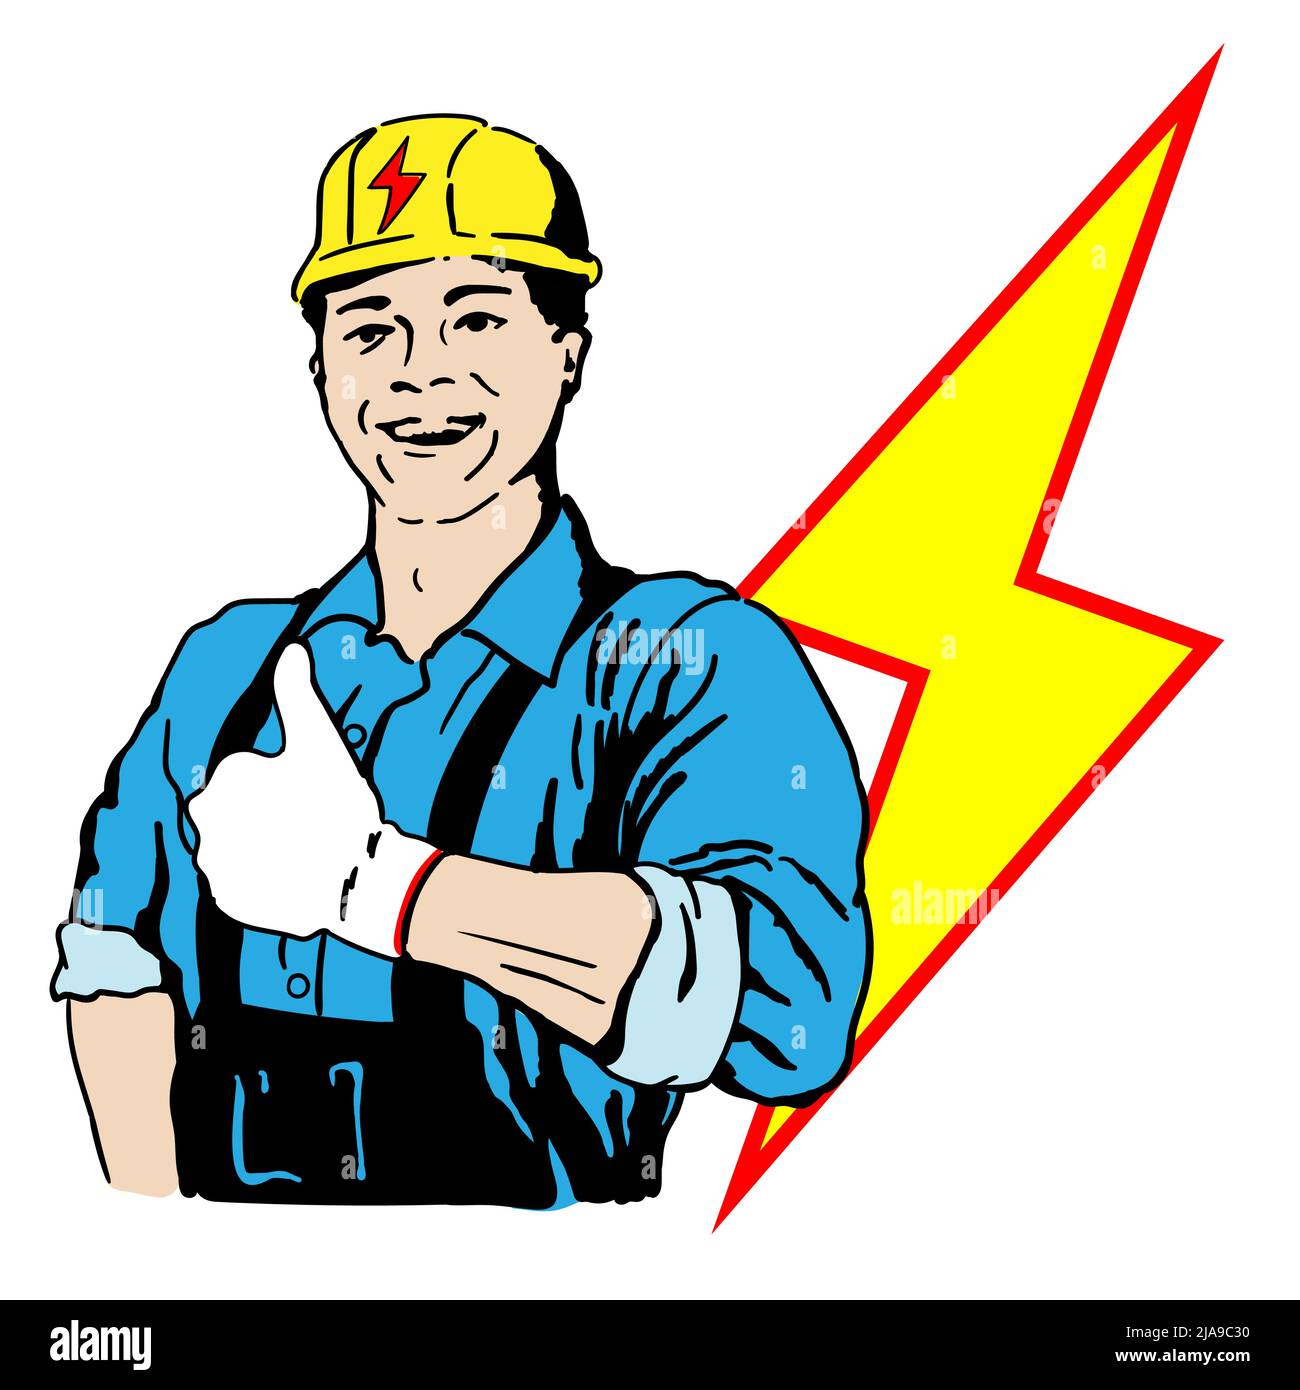 A man electrician in a working uniform and a helmet on his head shows a gesture of approval. Stock Vector